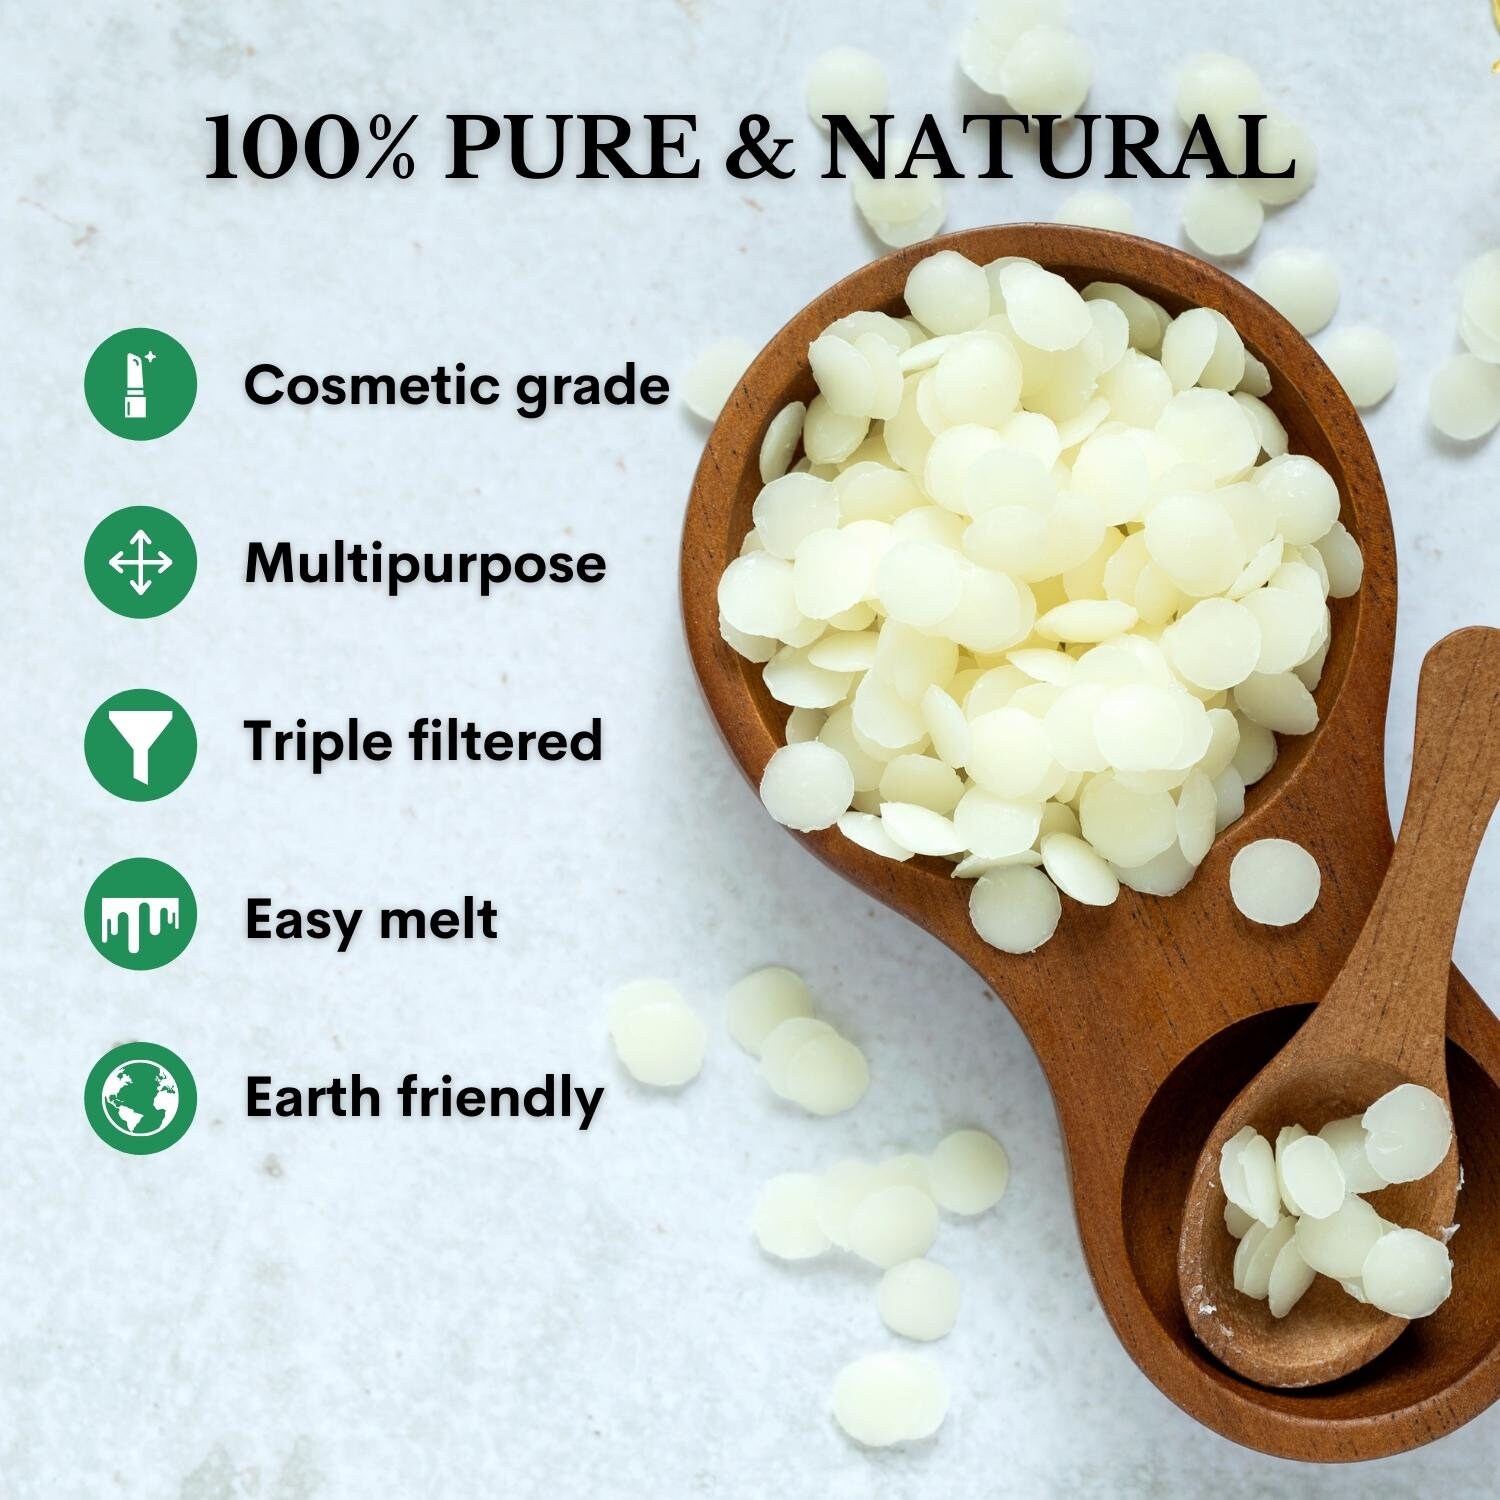 Buy Organic White Beeswax Pellets 1lb Bees Wax Pesticide-free